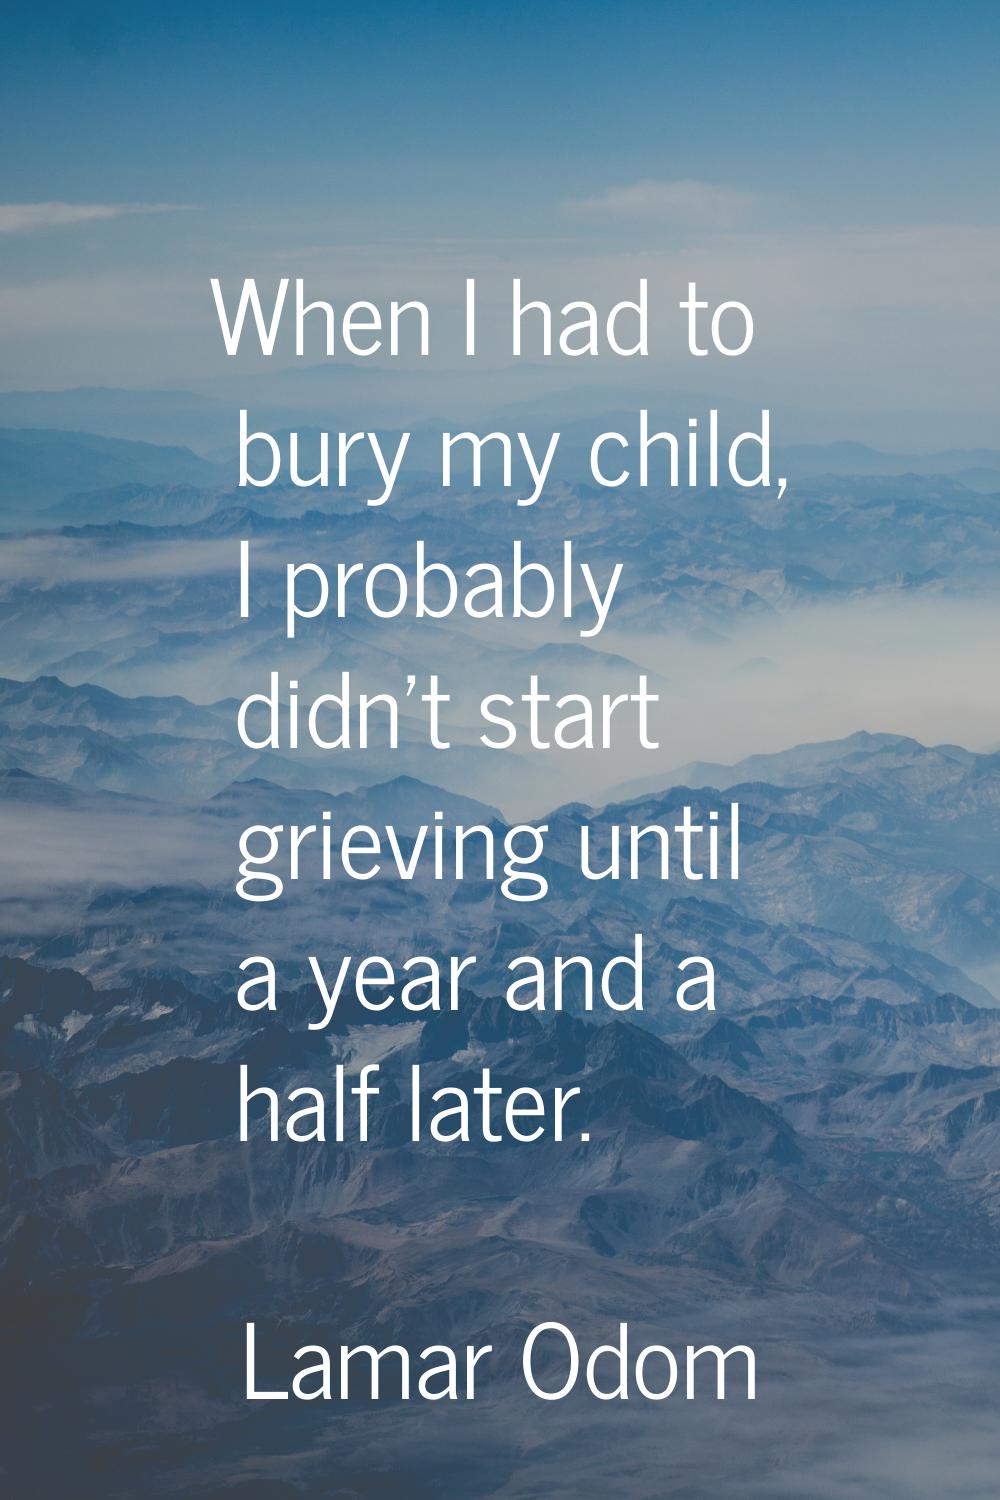 When I had to bury my child, I probably didn't start grieving until a year and a half later.